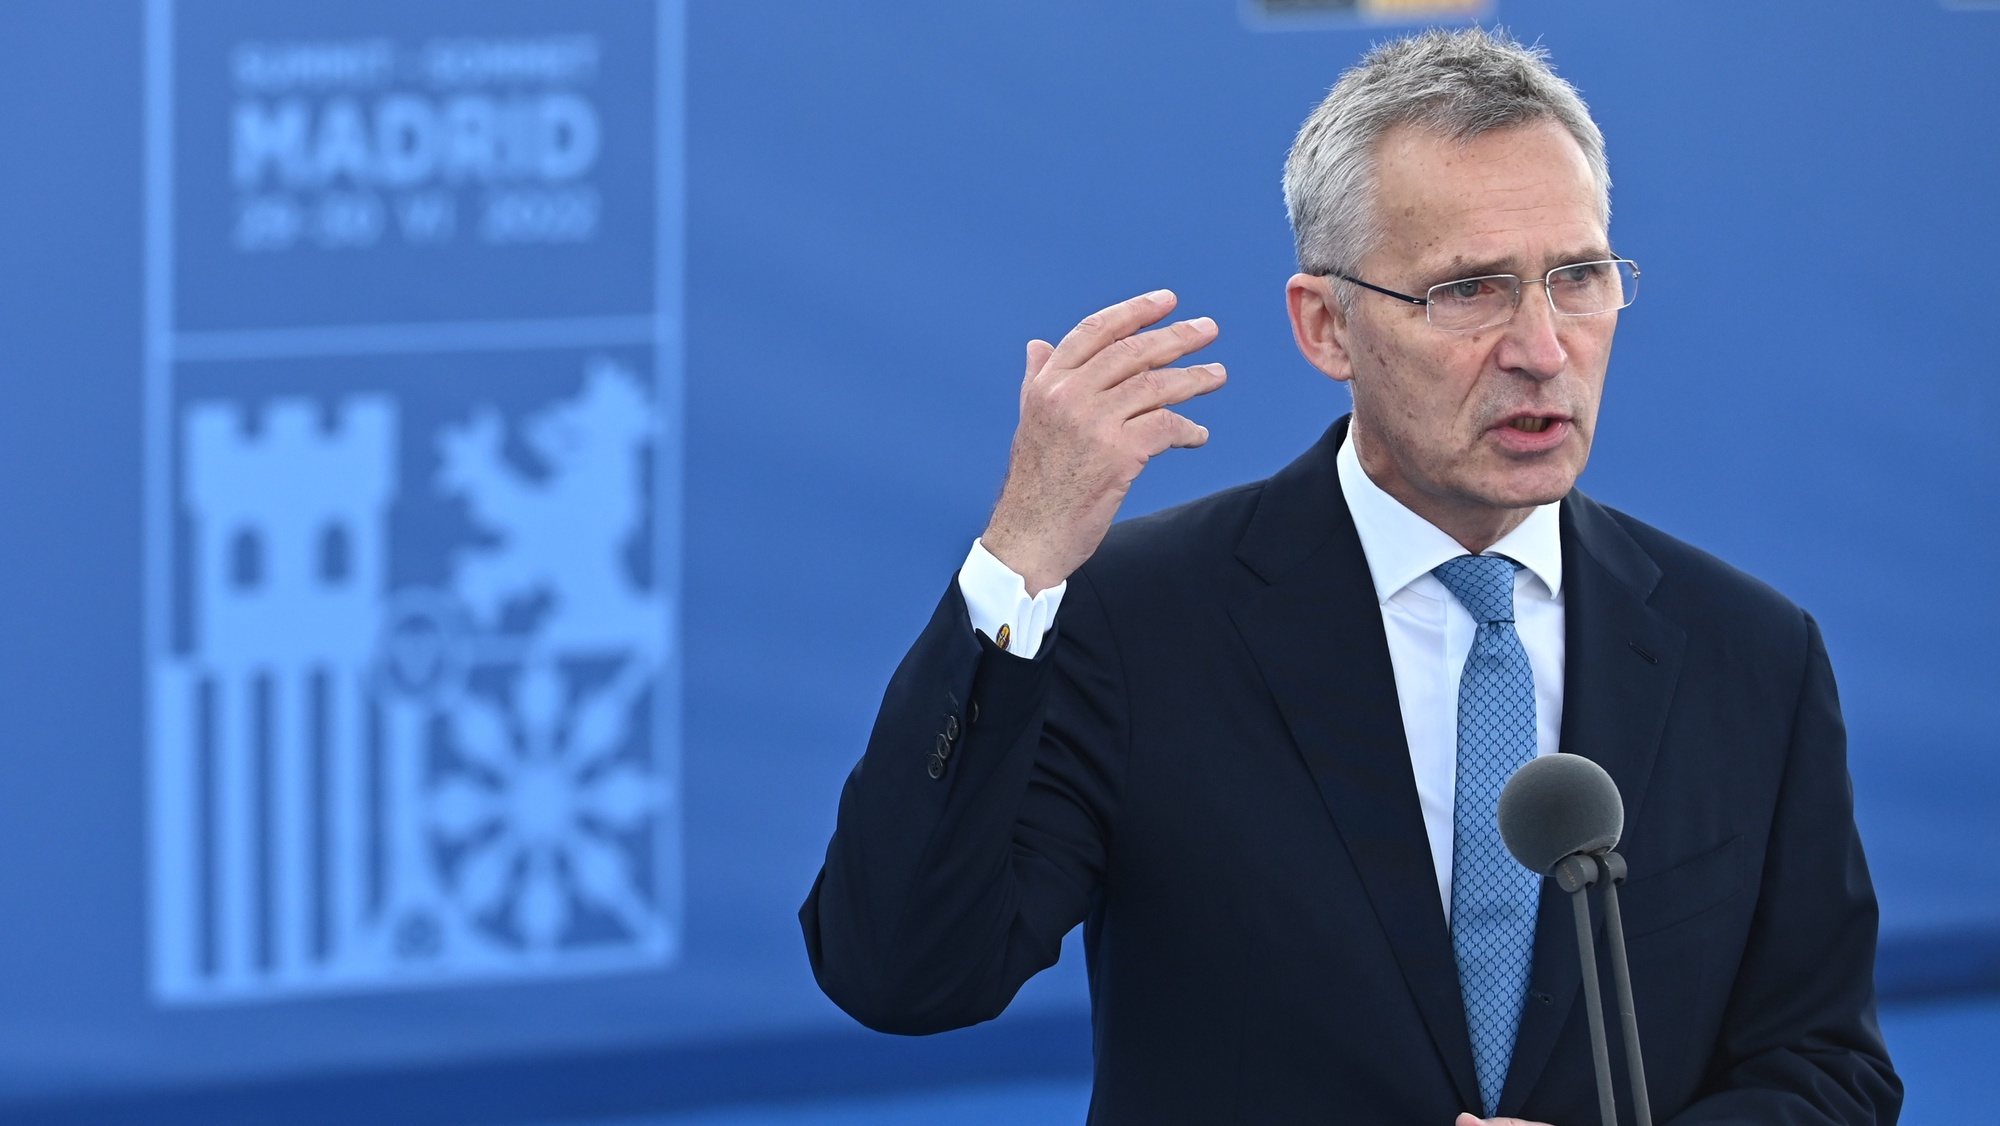 epa10040130 NATO&#039;s Secretary General Jens Stoltenberg talks to media upon his arrival to attend the first day of the NATO Summit at IFEMA Convention Center, in Madrid, Spain, 29 June 2022. Some 40 world leaders are to attend the summit, running from 29 to 30 June, focused on the ongoing Russian invasion of Ukraine. Spain hosts the event to mark the 40th anniversary of its accession to NATO.  EPA/Fernando Villar